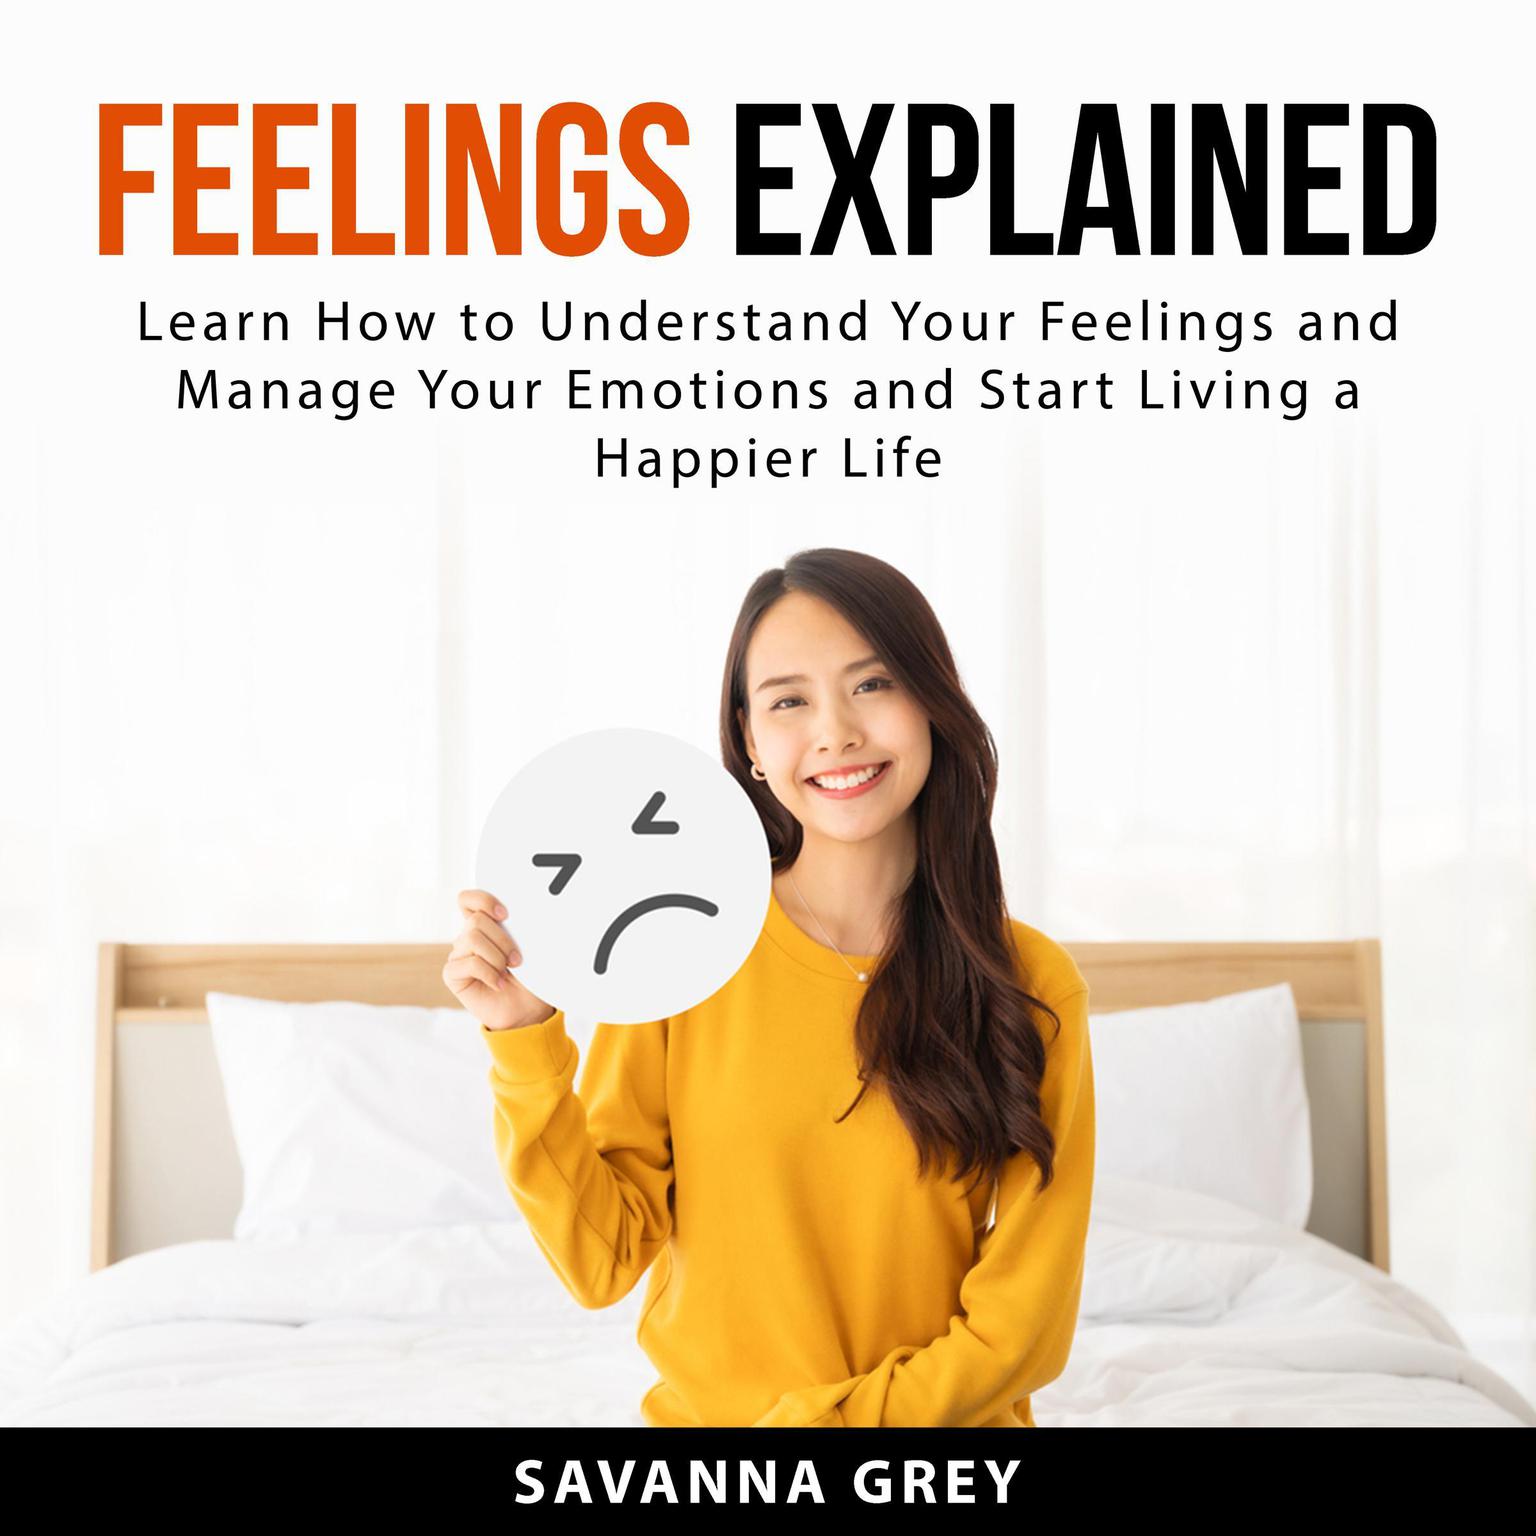 Feelings Explained: Learn How to Understand Your Feelings and and Manage Your Emotions and Start Living a Happier Life Audiobook, by Savannah Grey